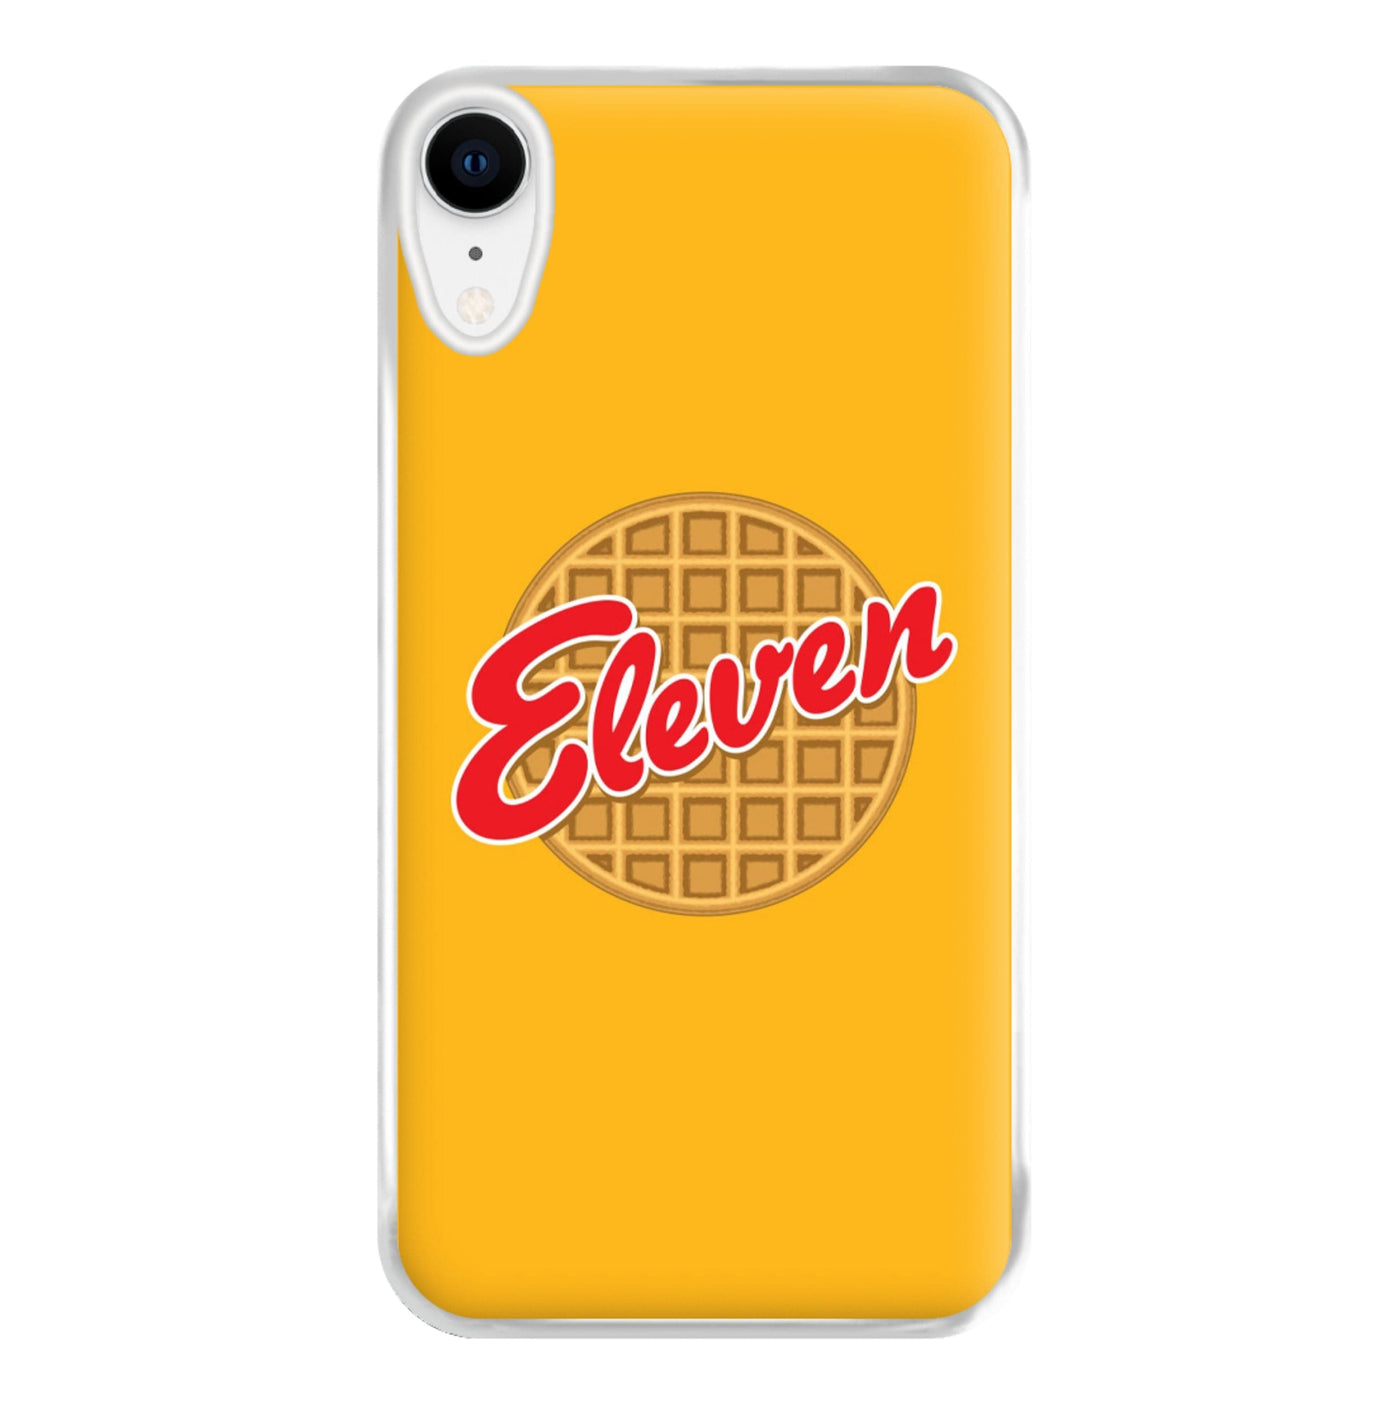 Eleven Waffles - Stranger Things Phone Case